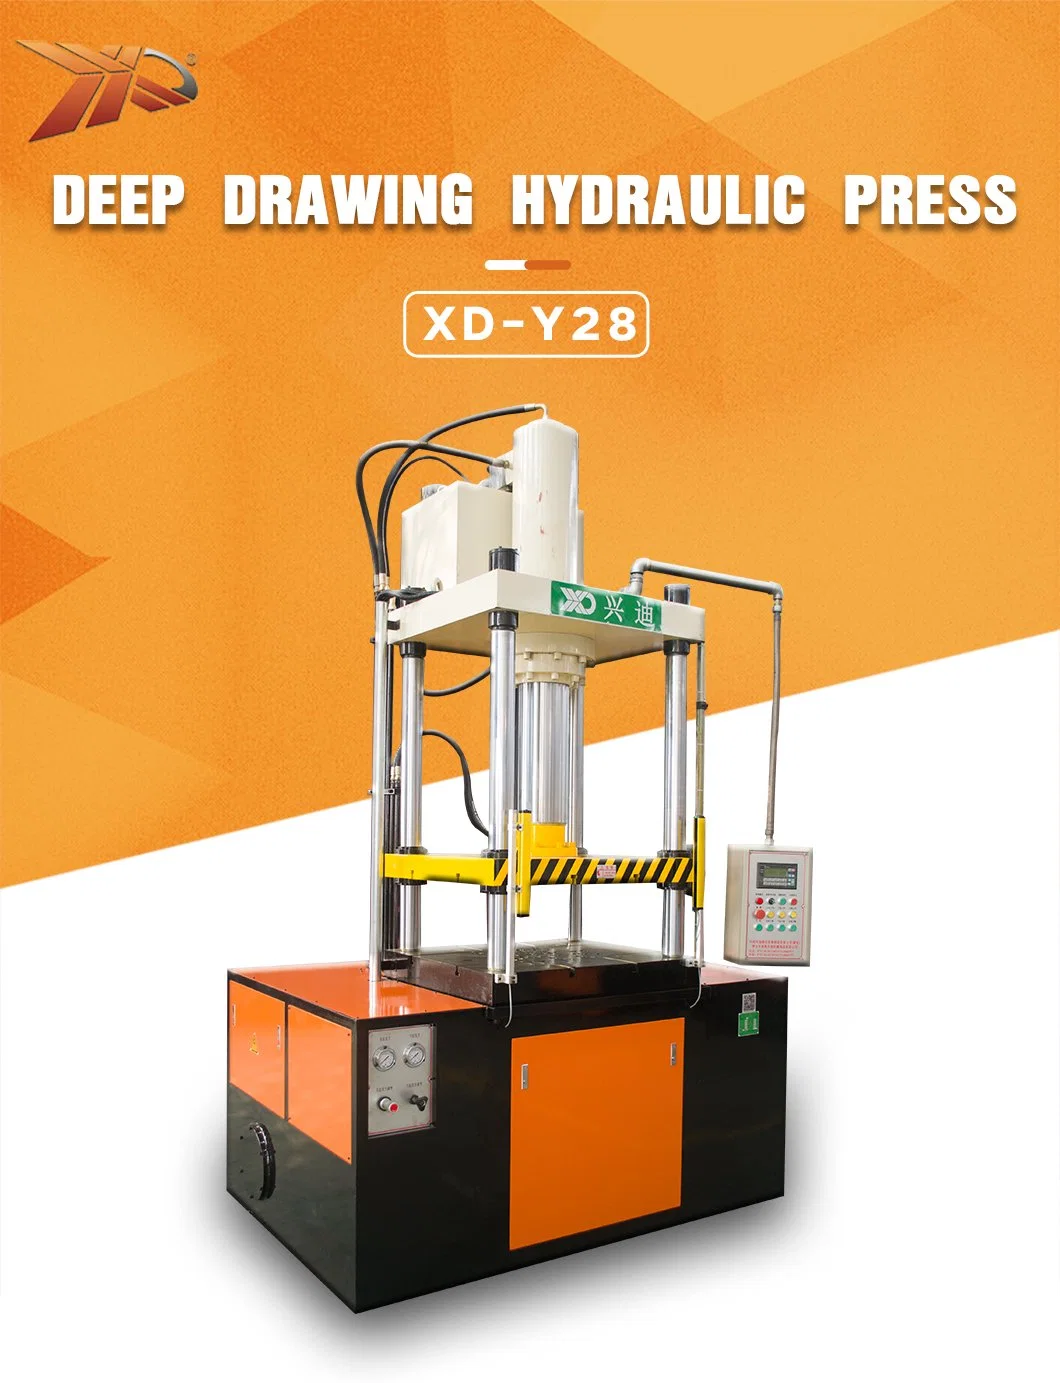 4 Post Double Action Automatic Metal Forming Deep Drawing Hydraulic Press Machine